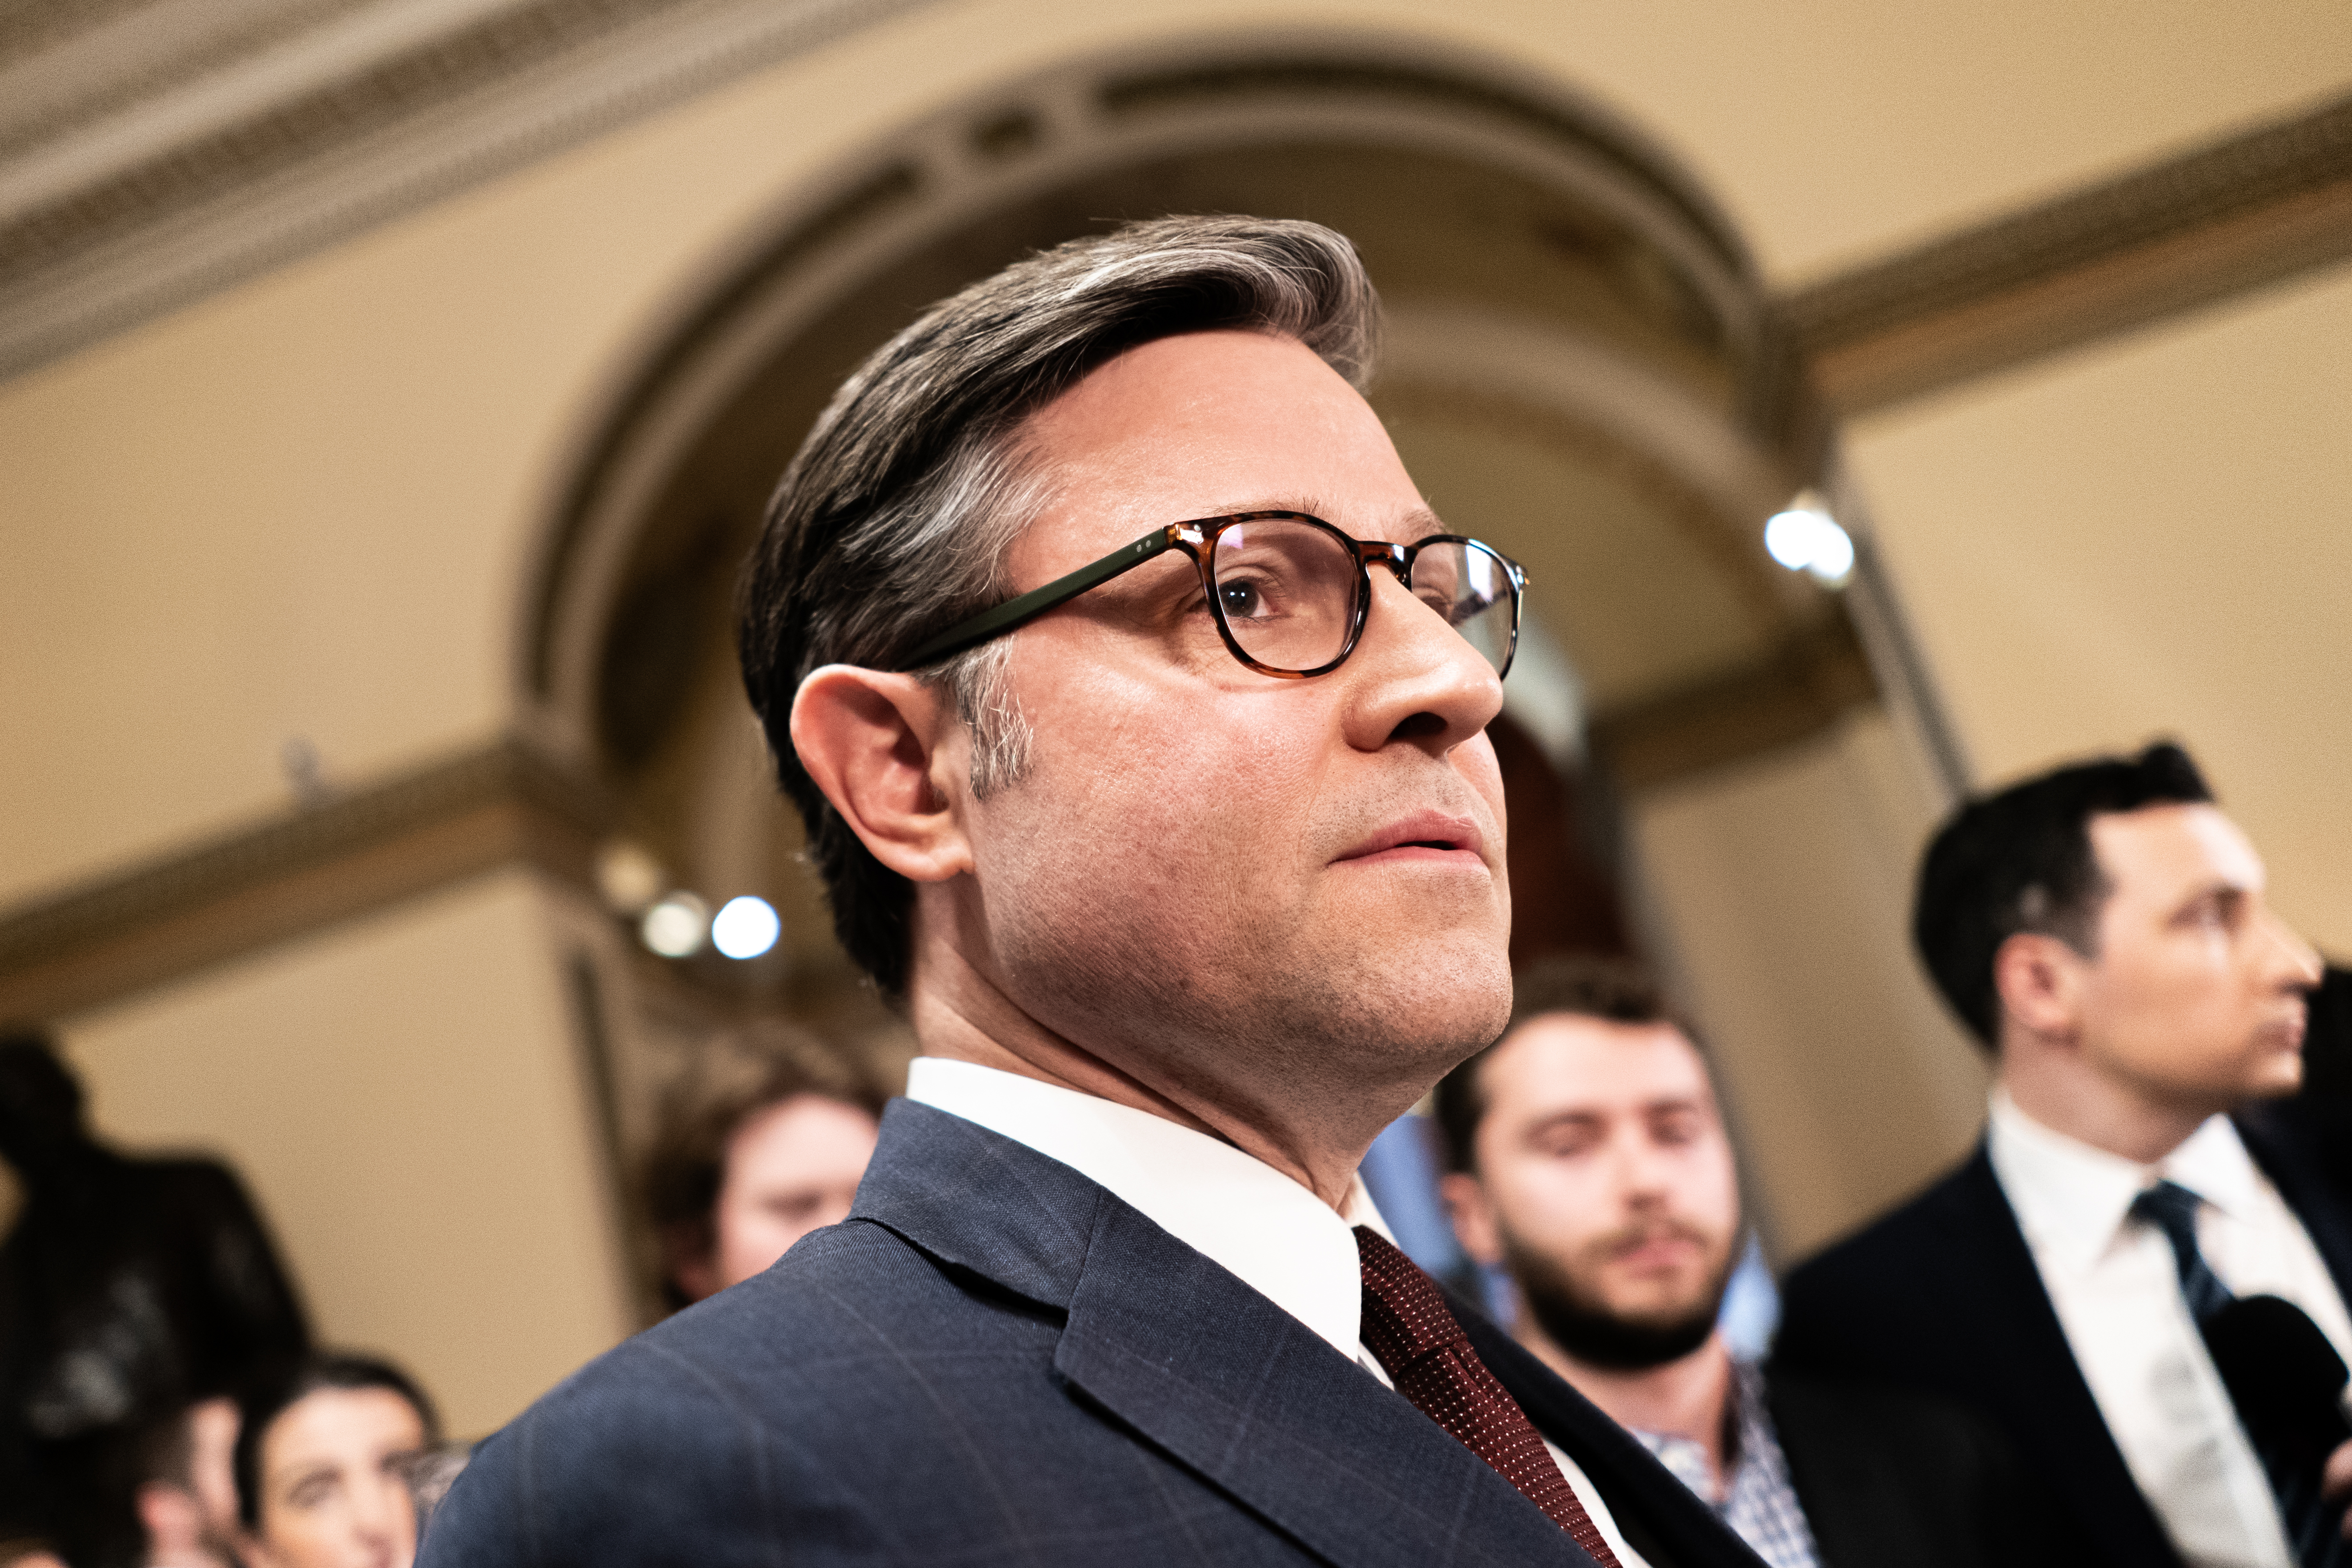 Mike Johnson, in a blue suit and glasses, is seen in profile, looking straight ahead.